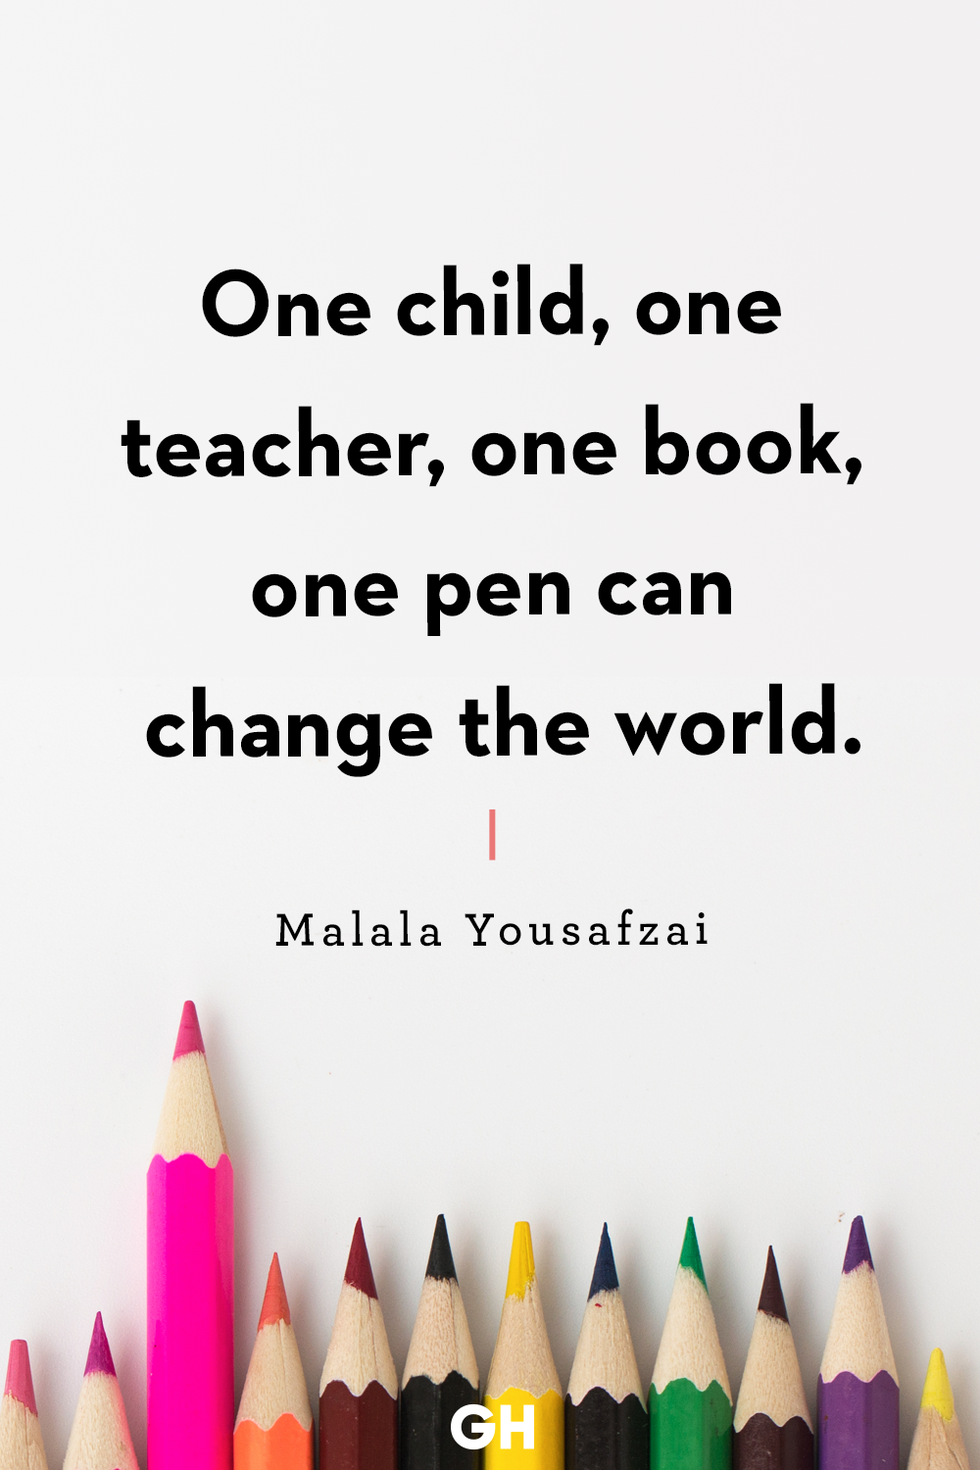 50 Best Back-to-School Quotes and Sayings About Education 2023